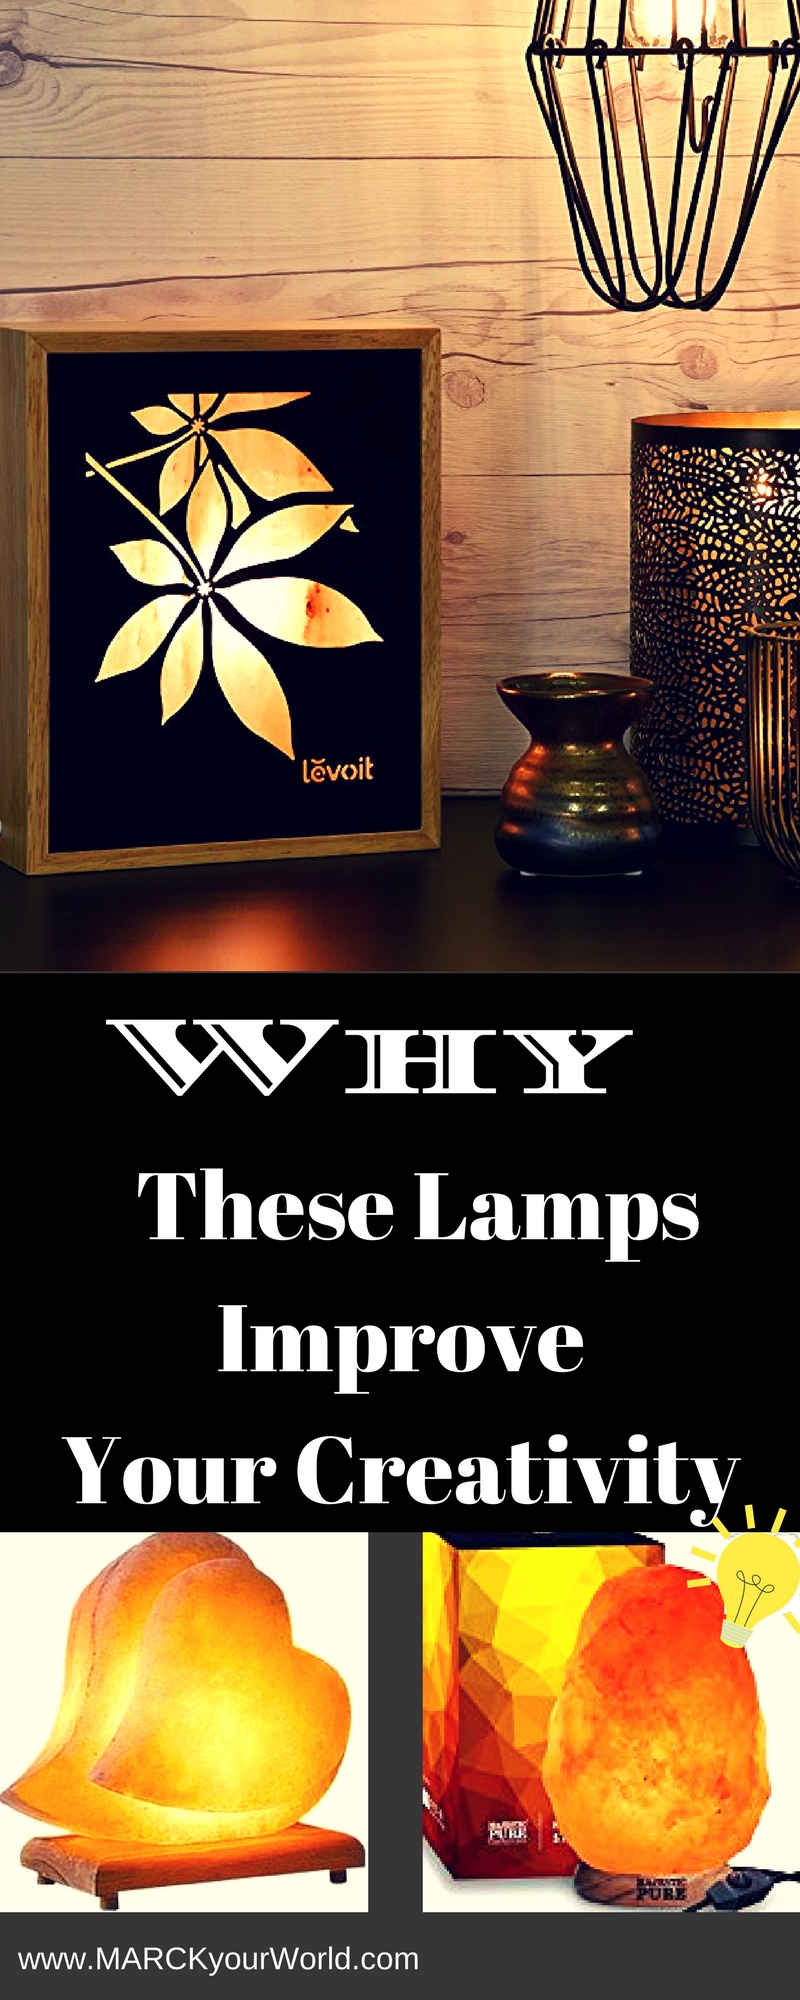 Why These Lamps Improve Creativity